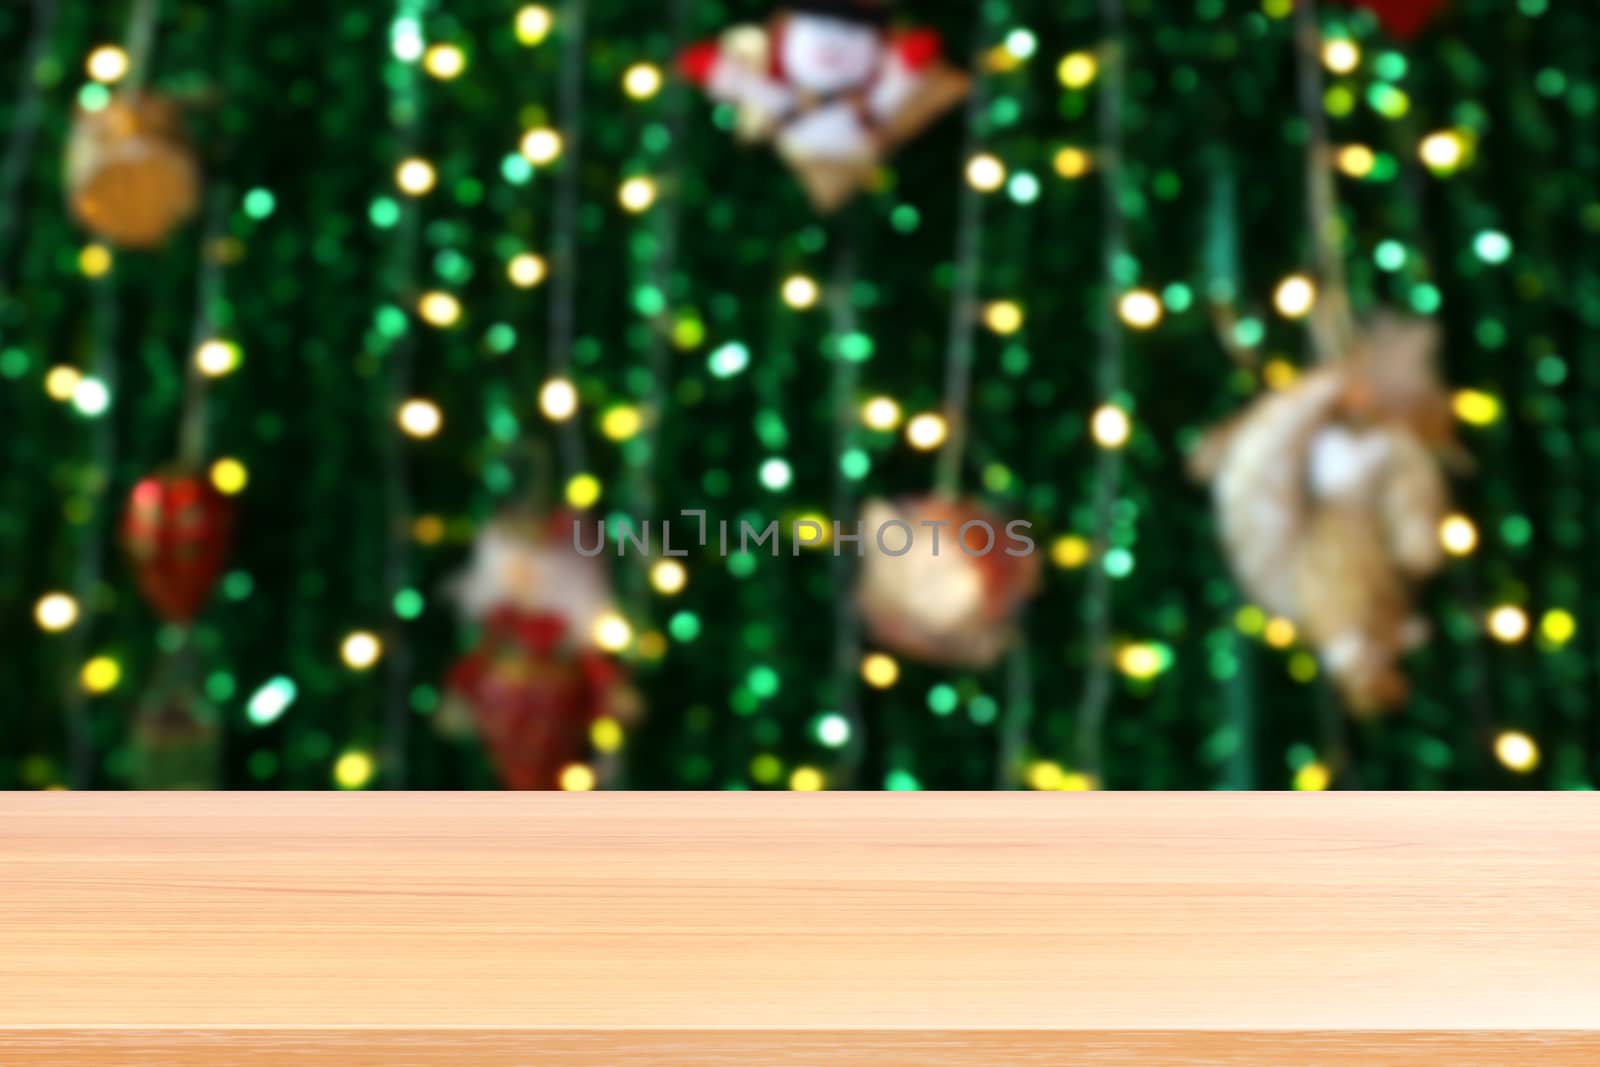 wood plank on lighting blurred christmas tree decoration background, empty wood table floors on lighting green christmas bokeh, wood table board empty front green glitter background light colorful by cgdeaw